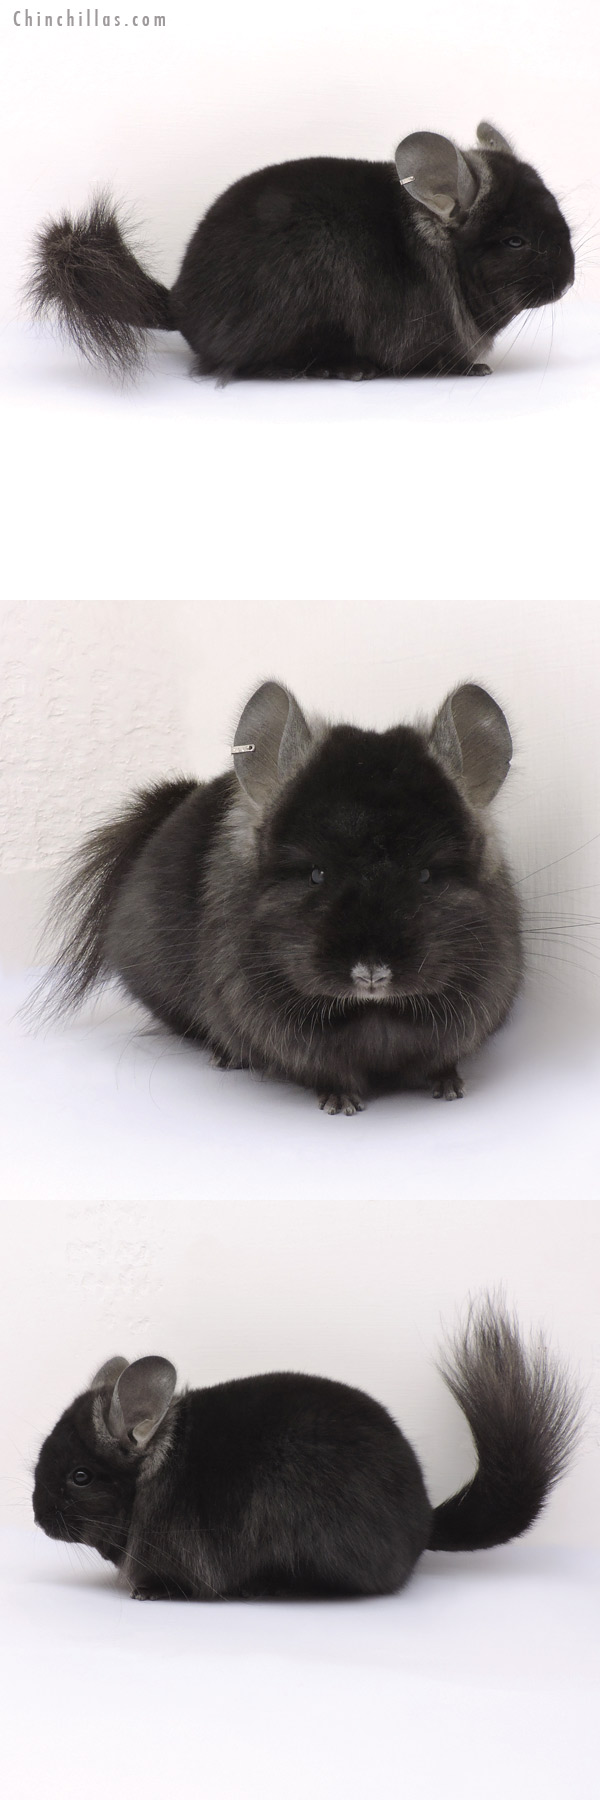 Chinchilla or related item offered for sale or export on Chinchillas.com - 14346 Ebony  Royal Persian Angora Female Chinchilla